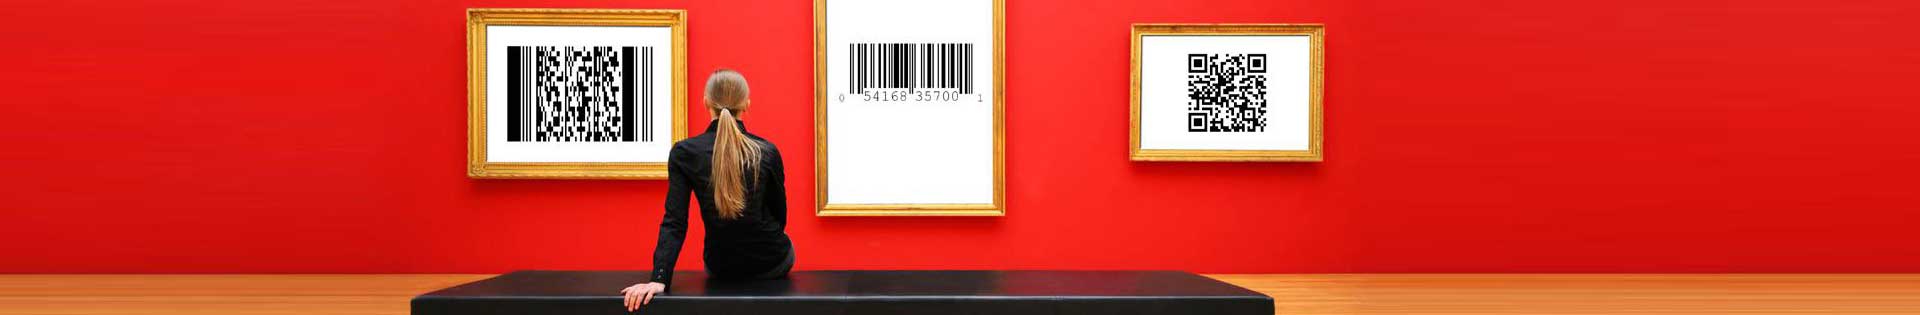 About Bar Code